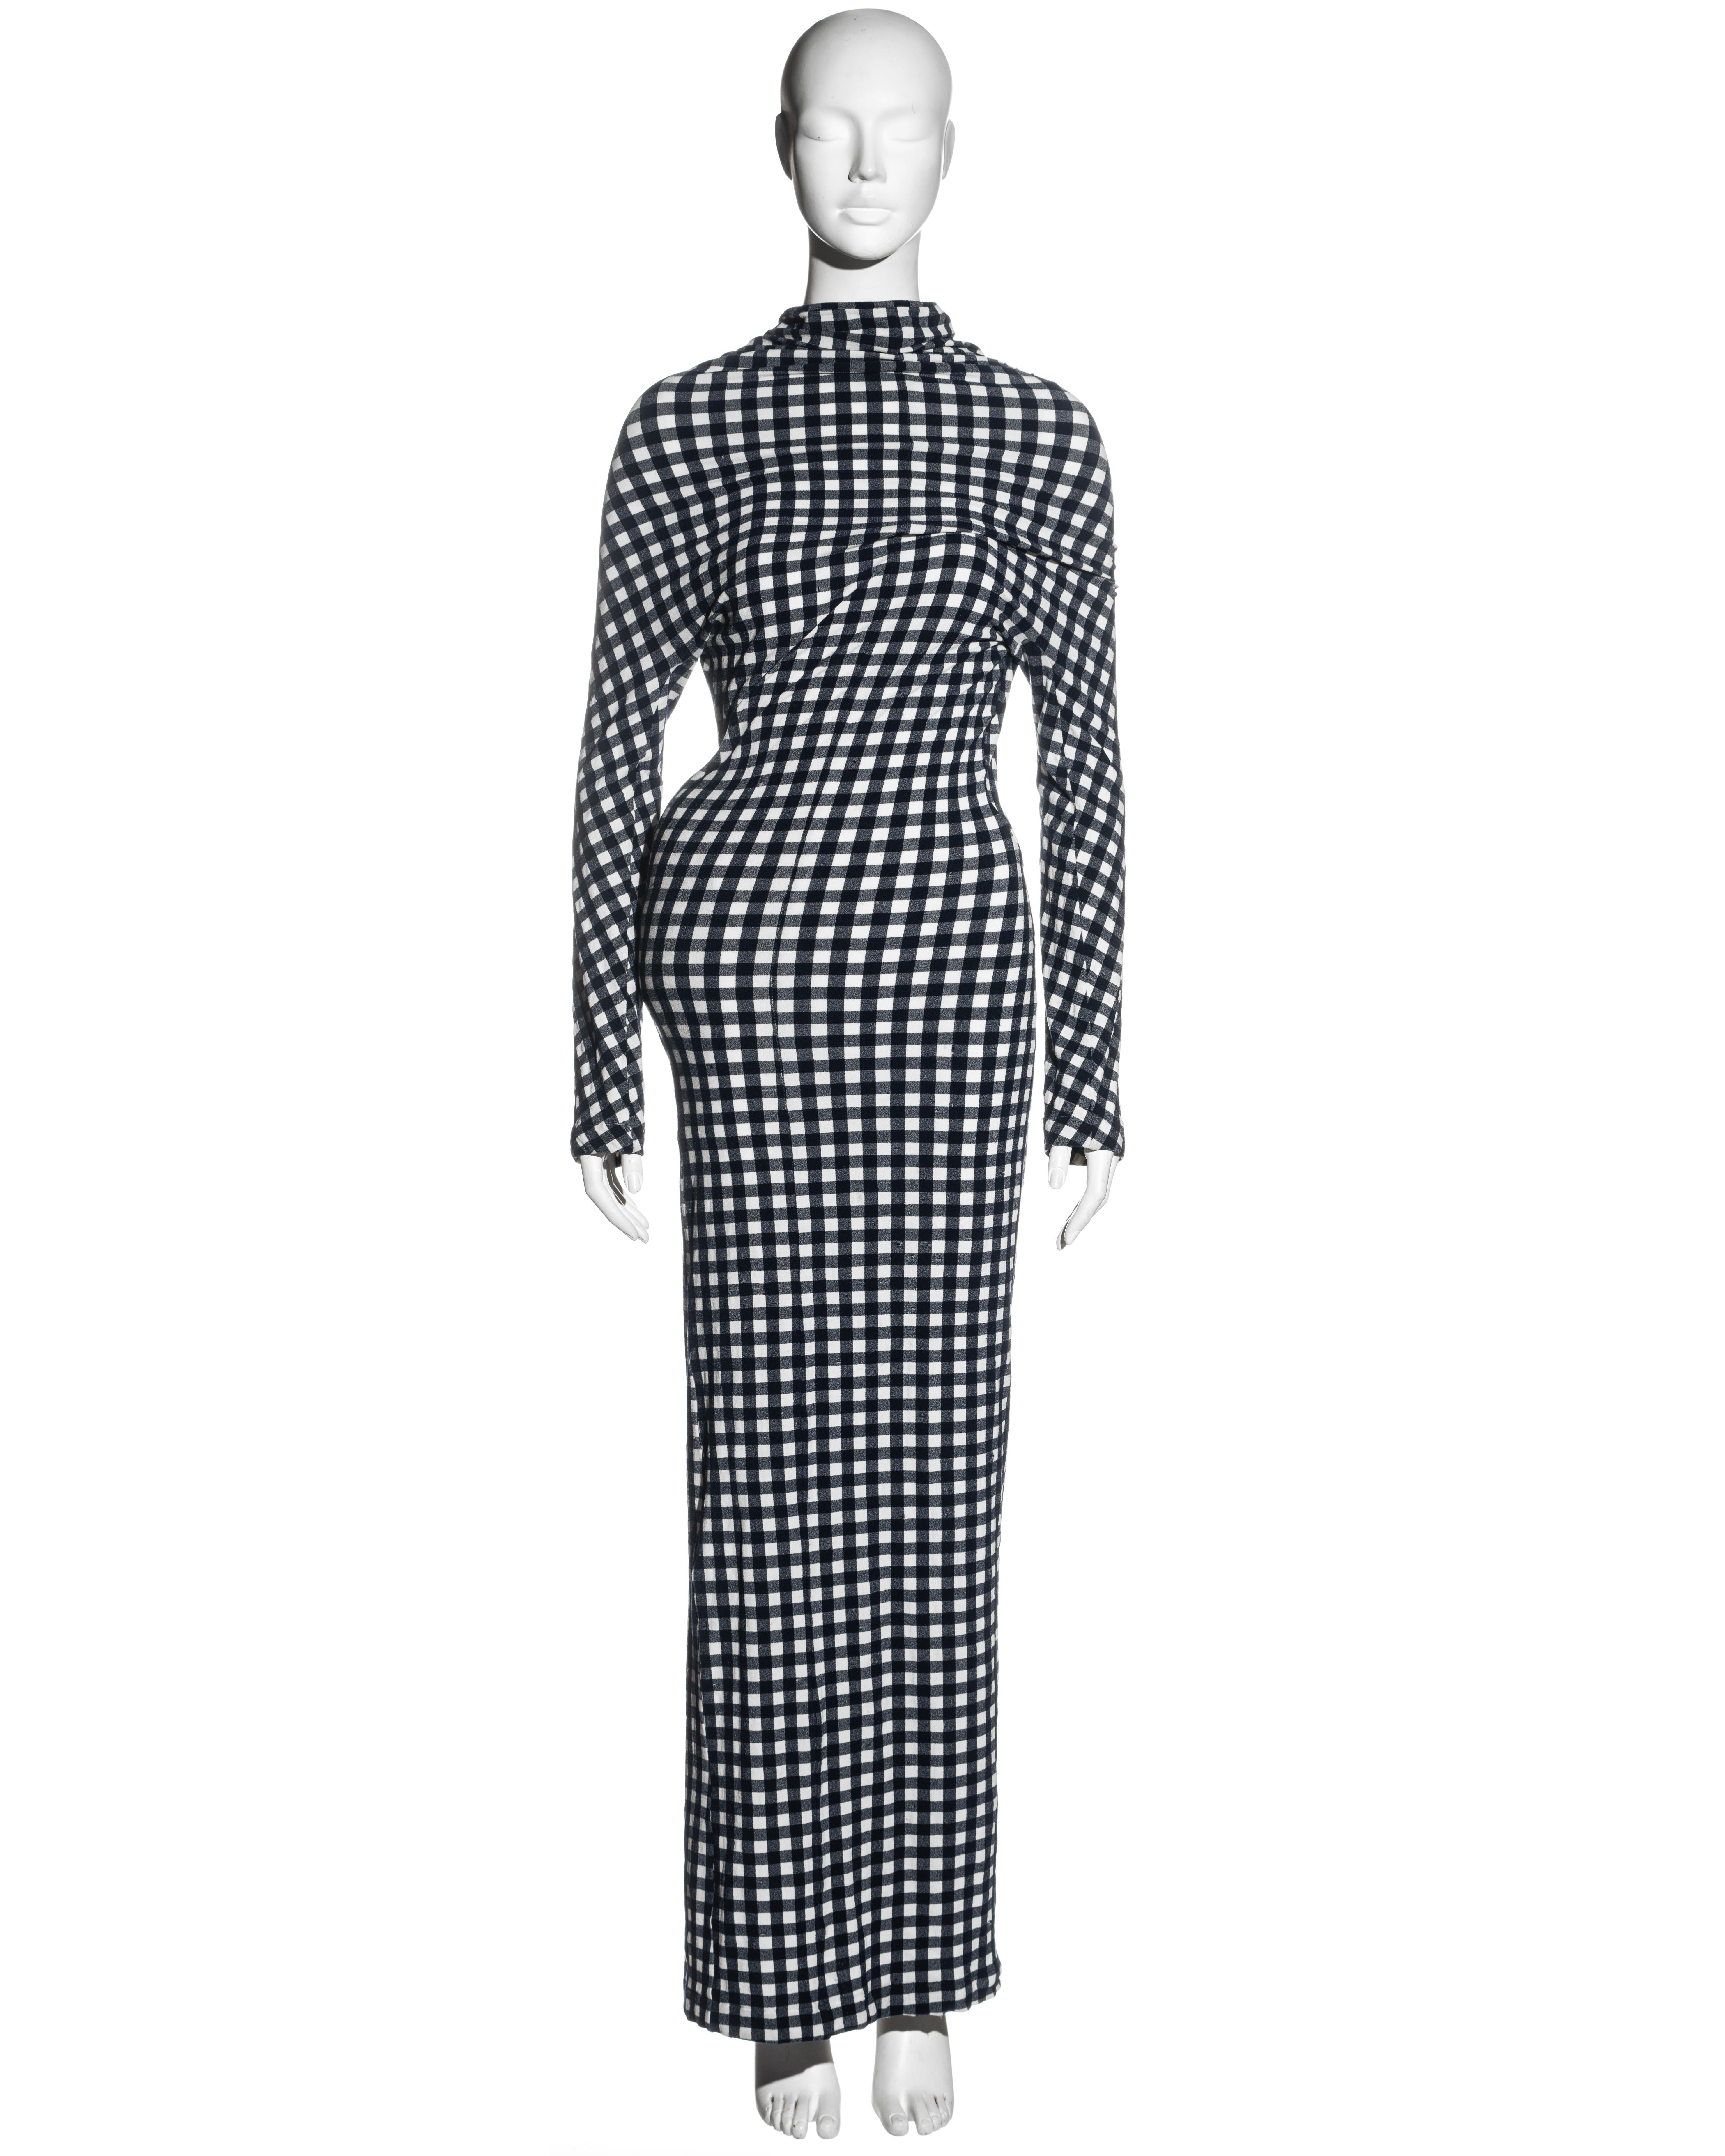 ▪ Important Comme des Garcons 'Body Meets Dress' / 'Lumps and Bumps' 2-piece showpiece ensemble
▪ Long-sleeved stretch navy and white nylon gingham maxi dress
▪ White nylon mesh underdress with down pillows positioned at the hip and upper back
▪